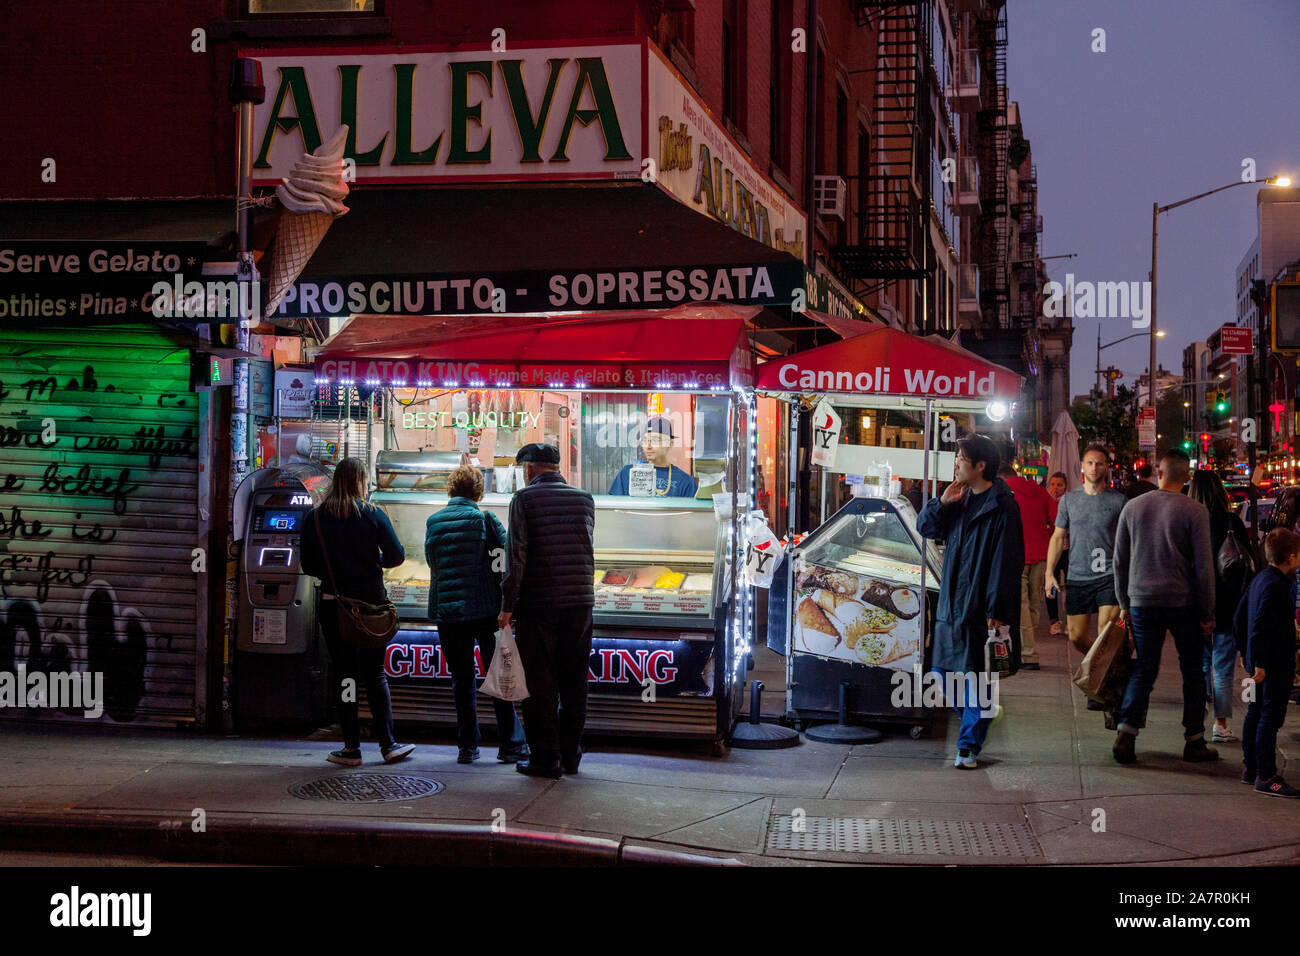 Alleva Italian Dairy at Grand and Mulberry Streets, Manhattan, New York, NY, United States of America. Stock Photo